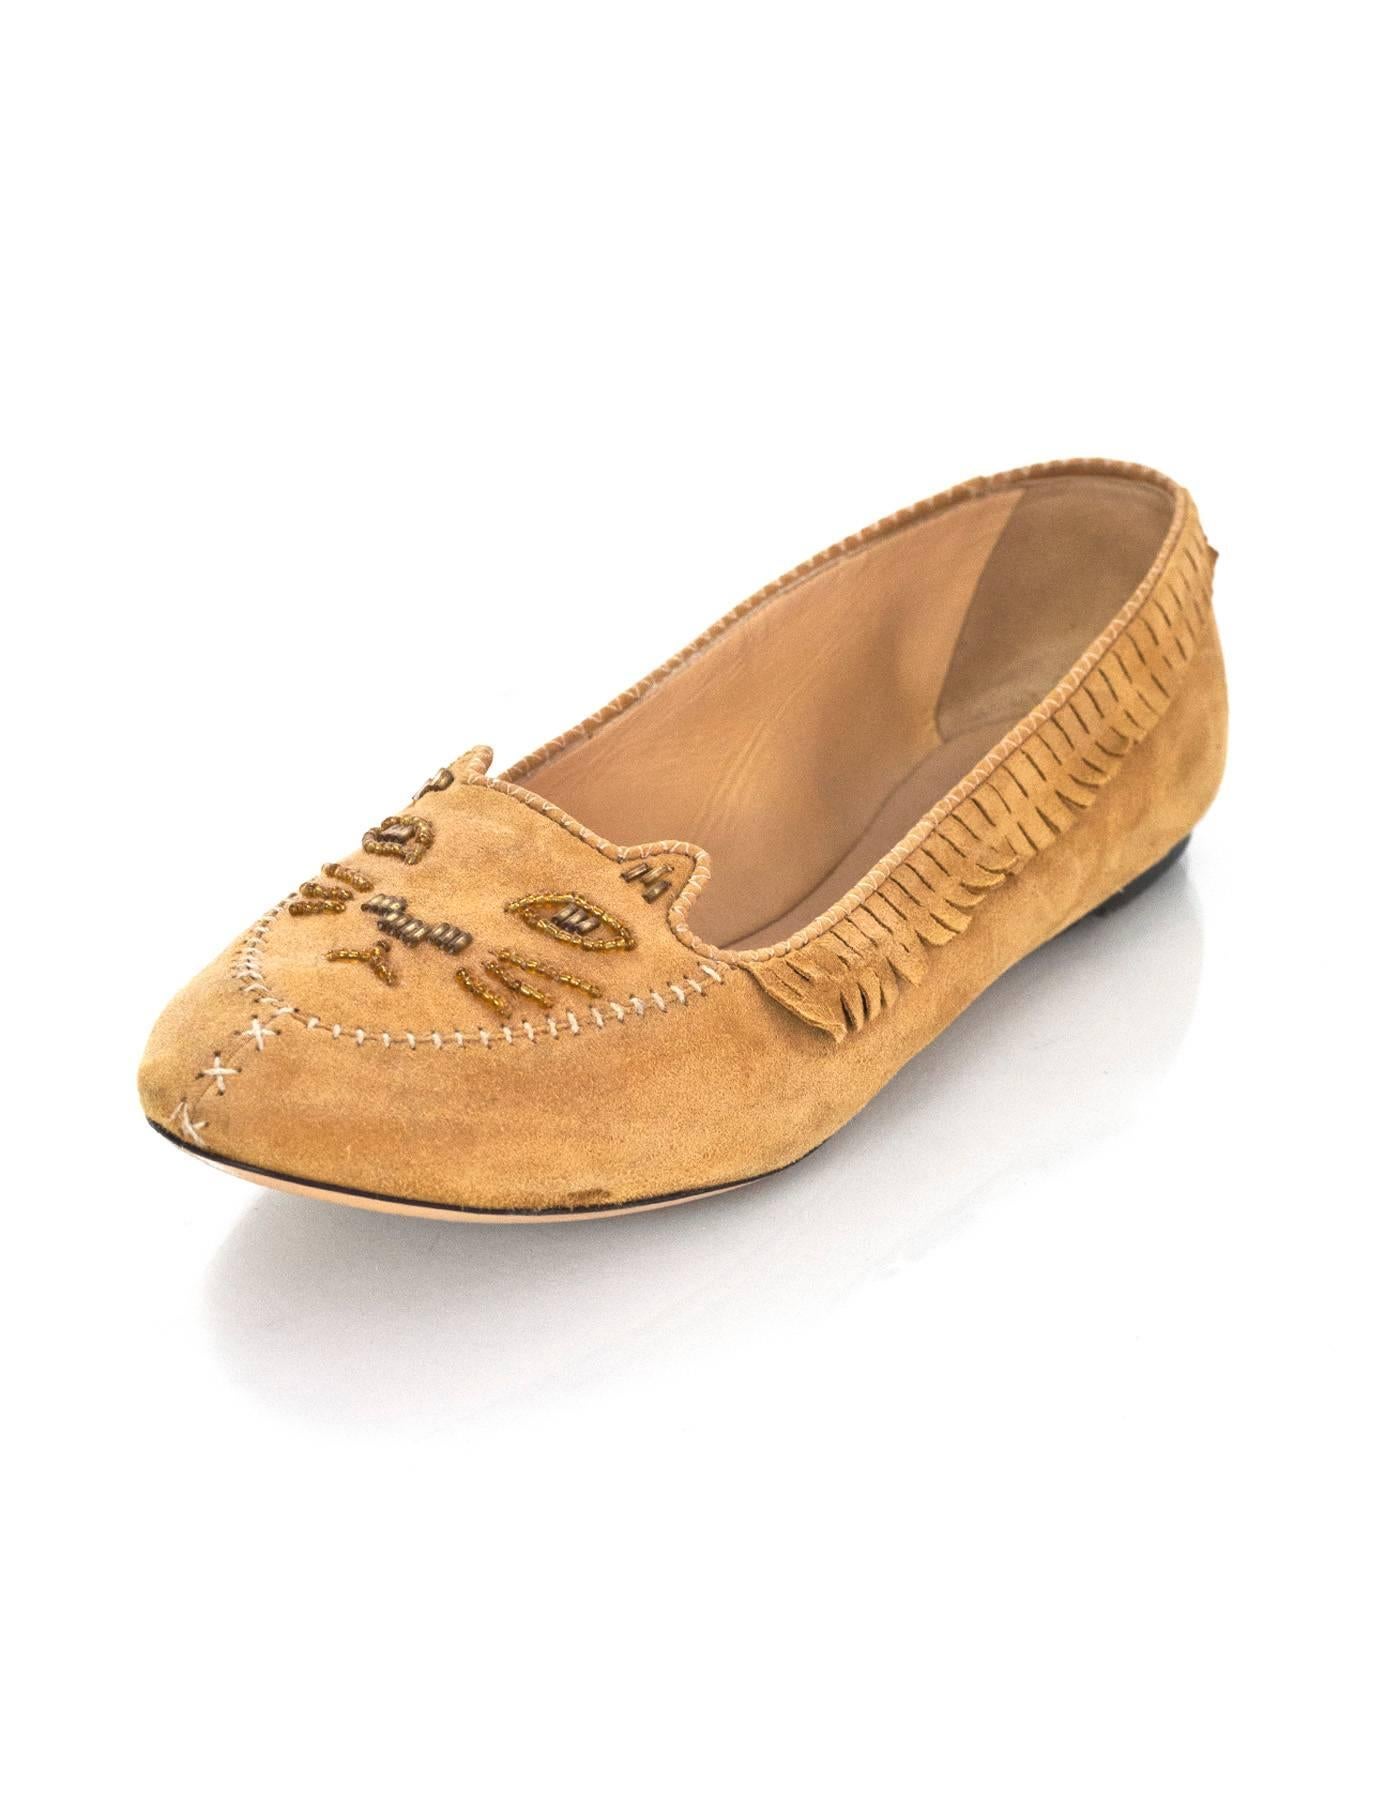 Charlotte Olympia Tan Kitty Moccasin Flats Sz 41

Made In: Italy
Color: Tan
Materials: Suede
Closure/Opening: Slide on
Sole Stamp: vero cuoio made in italy 41
Retail Price: $625 + tax
Overall Condition: Excellent pre-owned condition with the